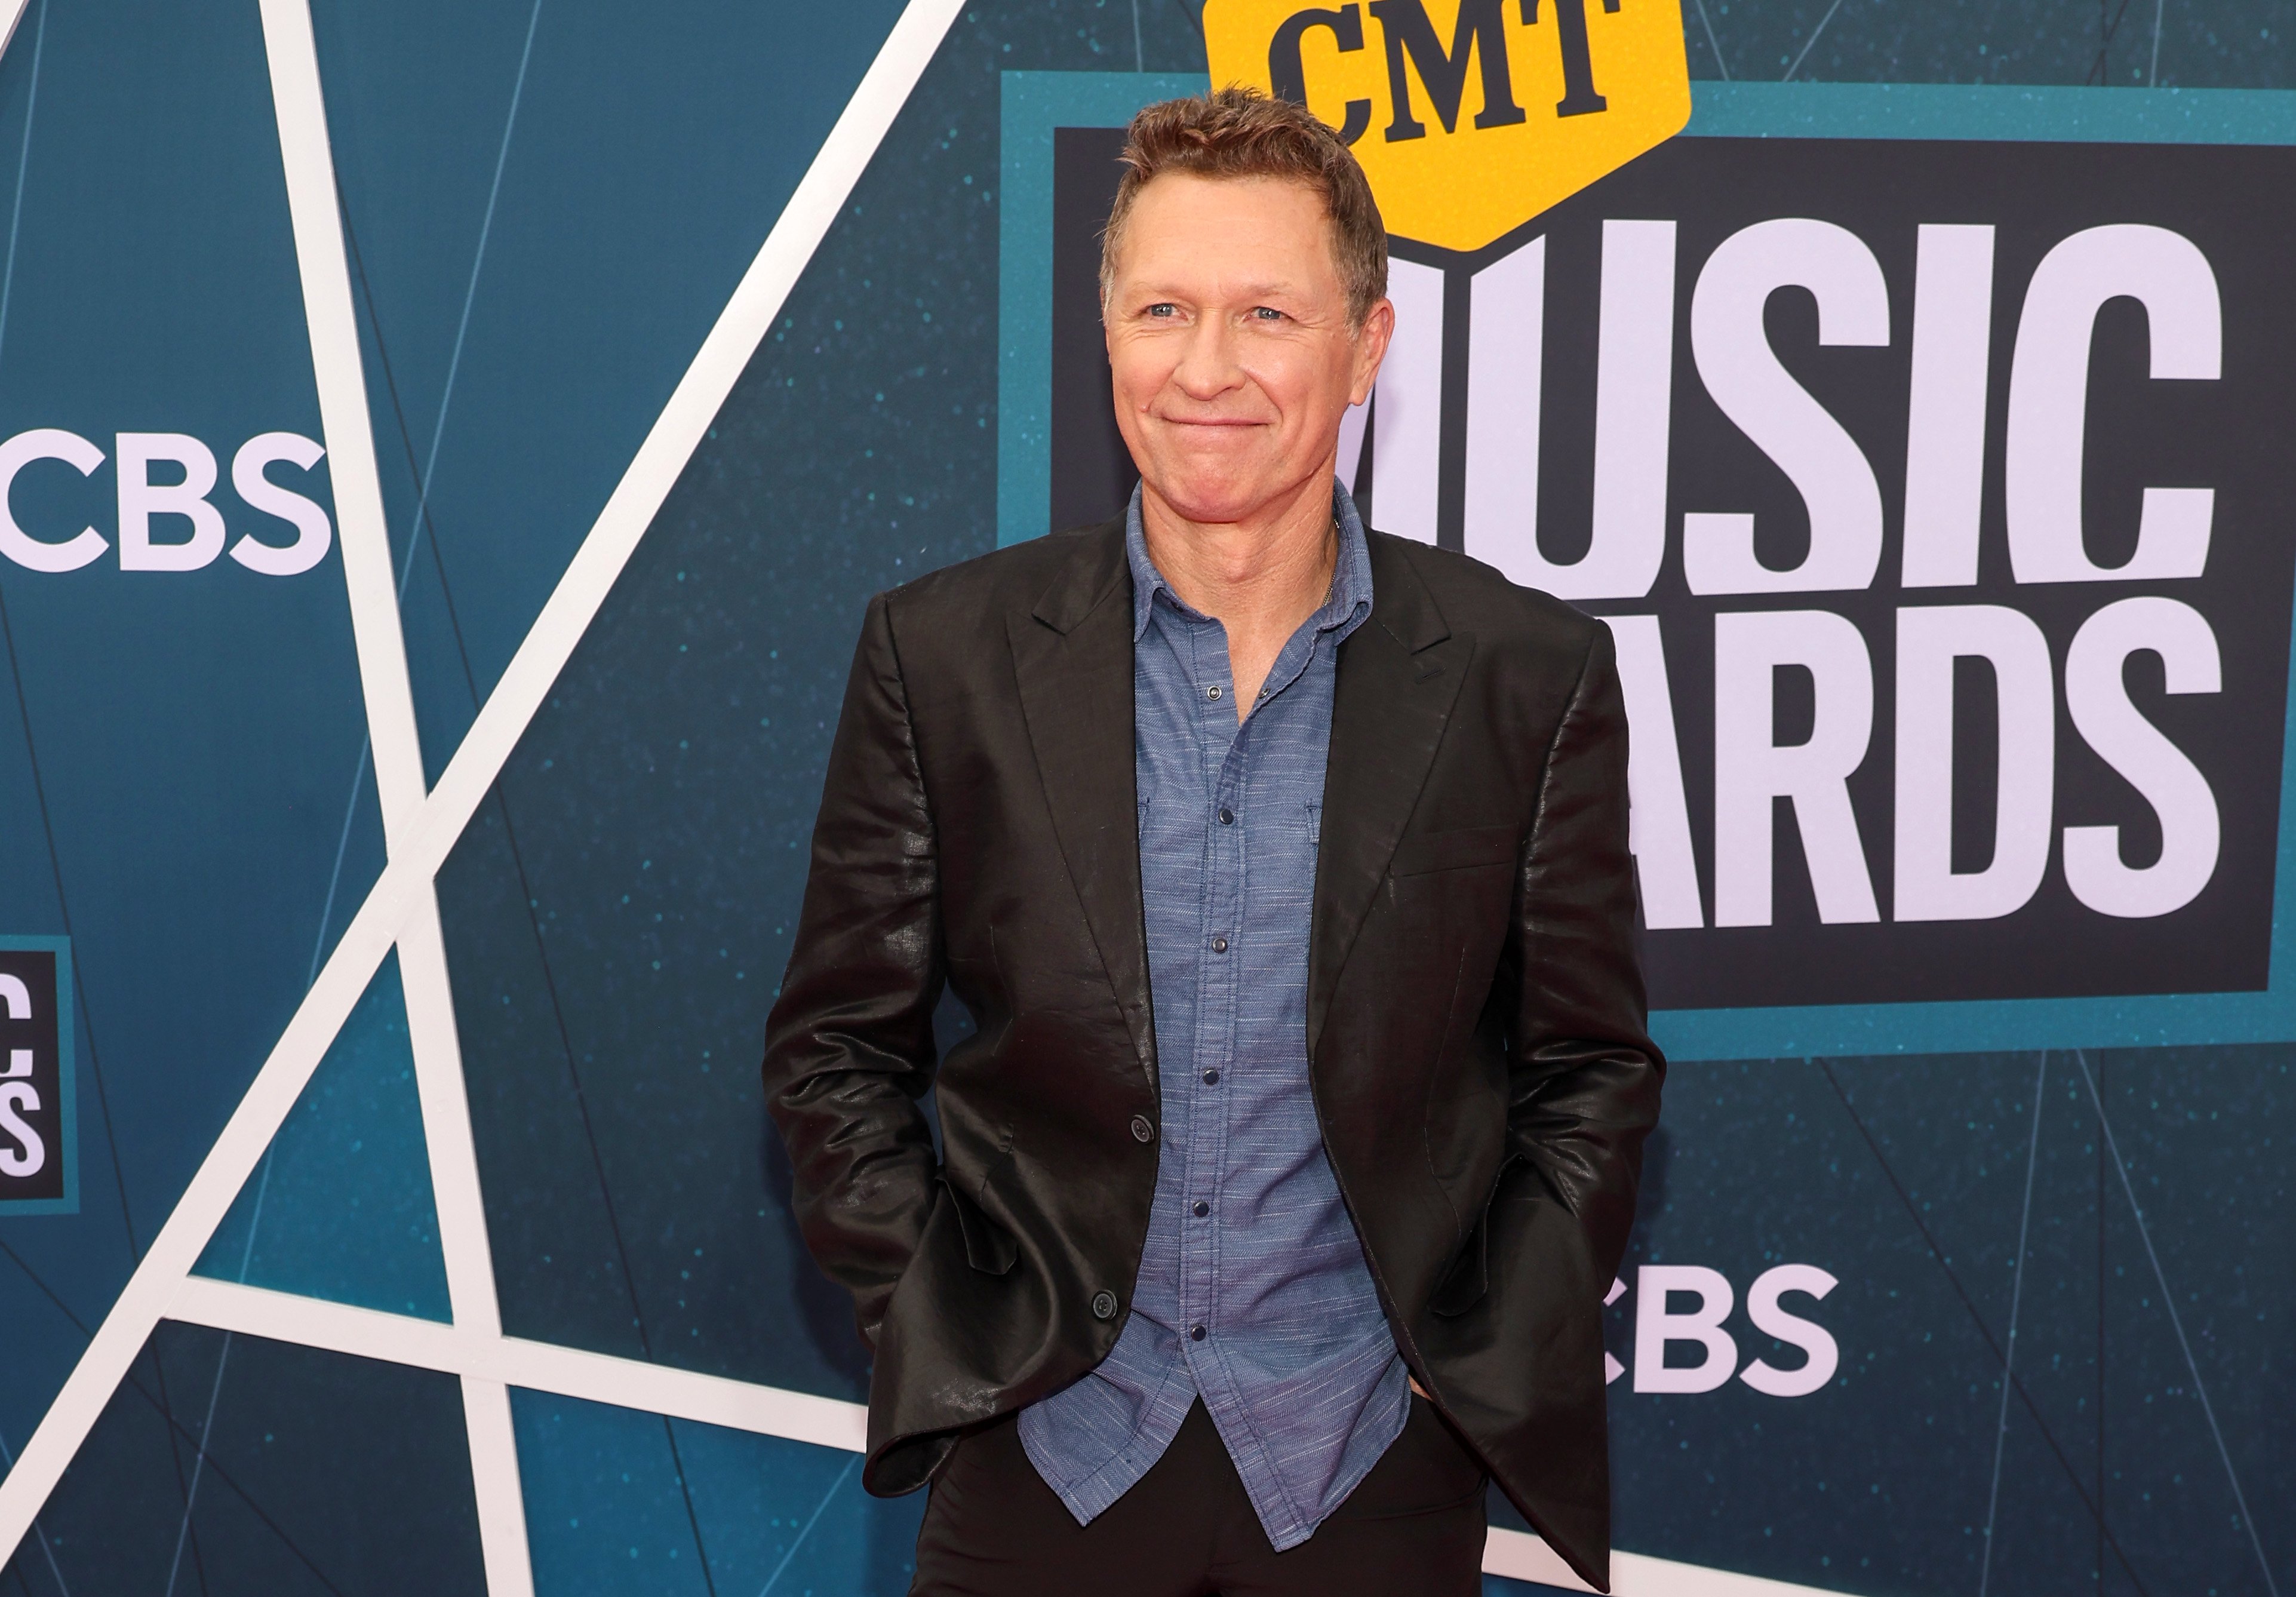 Craig Morgan attends the 2022 CMT Music Awards at Nashville Municipal Auditorium on April 11, 2022, in Nashville, Tennessee. | Source: Getty Images